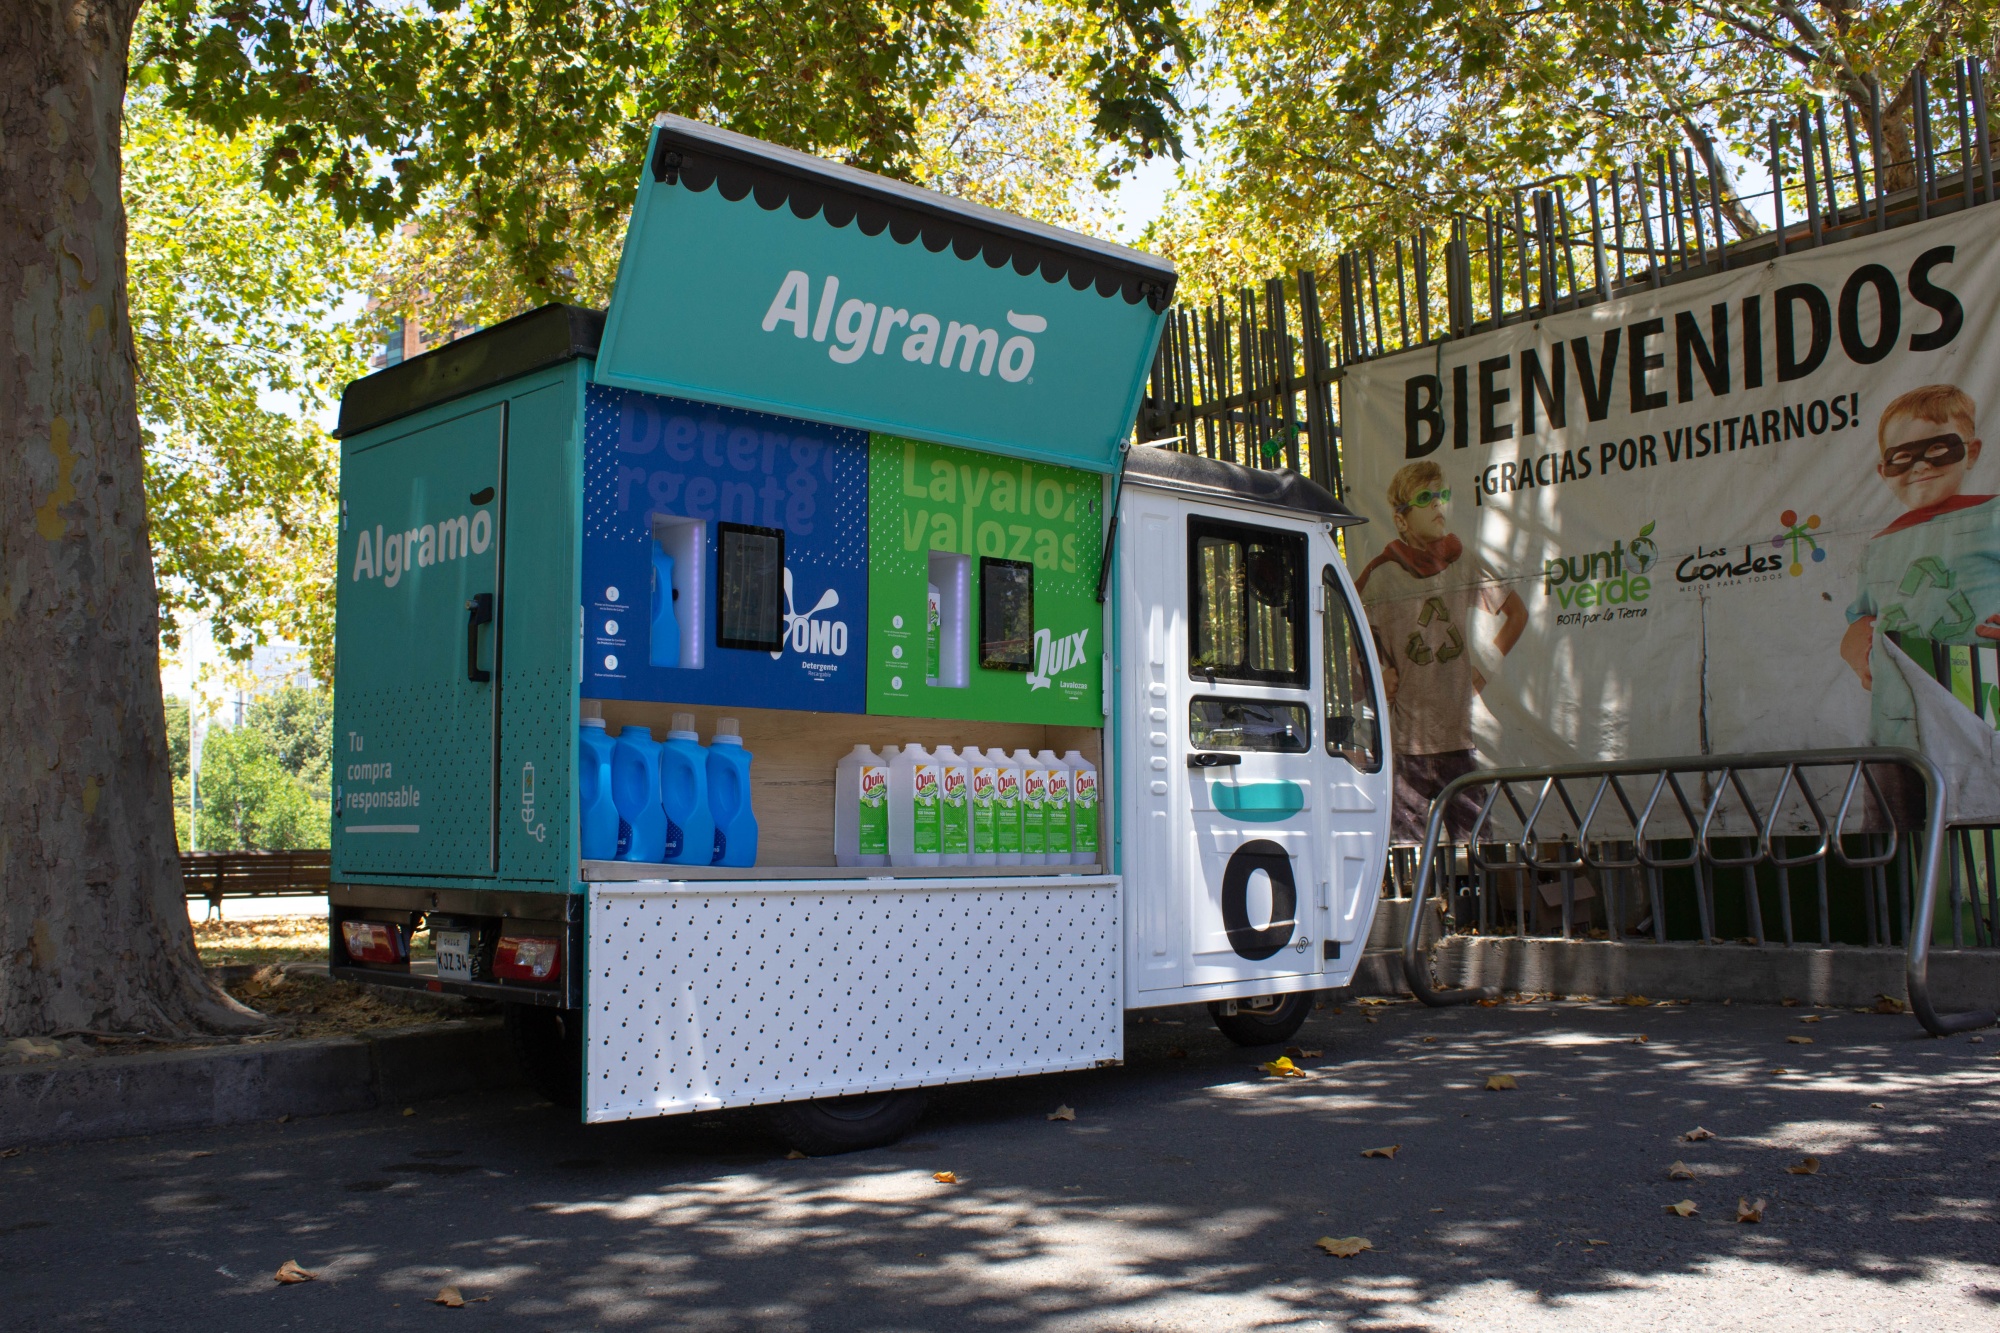 Unilever partnered with startup Algramo to offer a mobile refill station for its OMO laundry detergent.